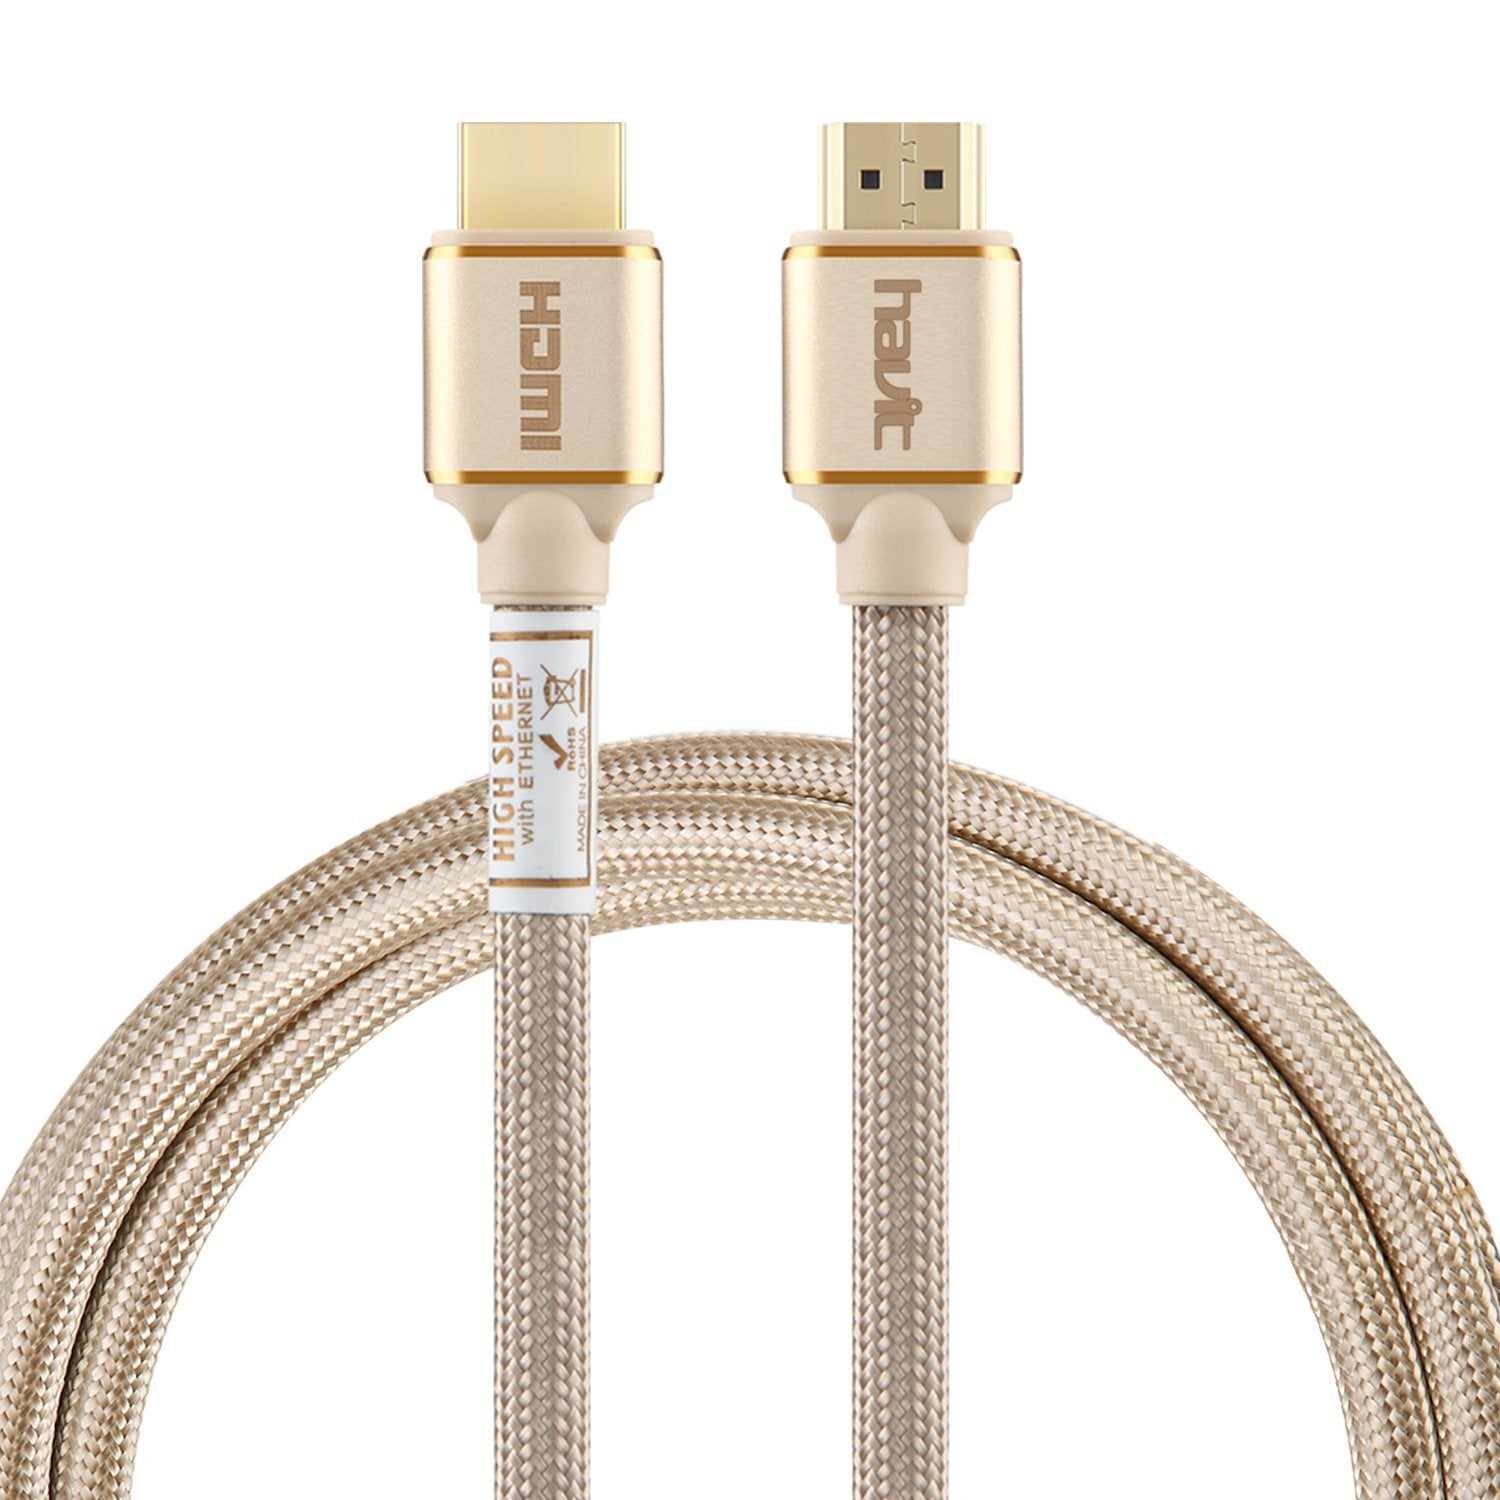 HAVIT HV-X90 HDMI 2.0 Cable, 2-Meter, Male to Male, Braided, Gold Plated Plugs